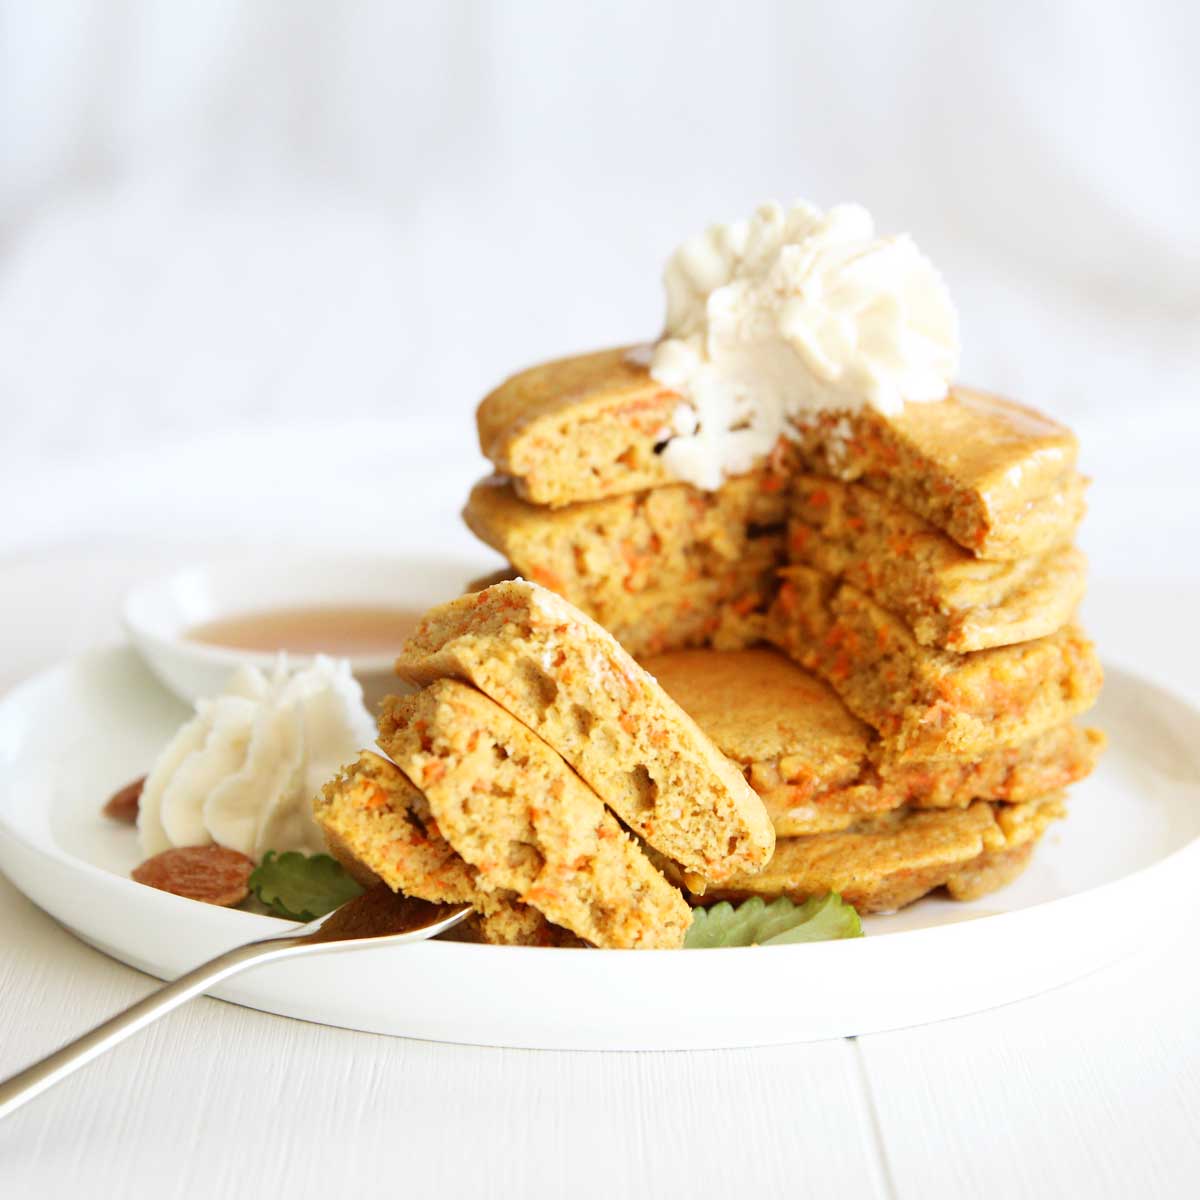 Healthy Carrot Cake Mochi Pancakes Made with Almond Flour - Ricotta Cheese Hot Cross Buns